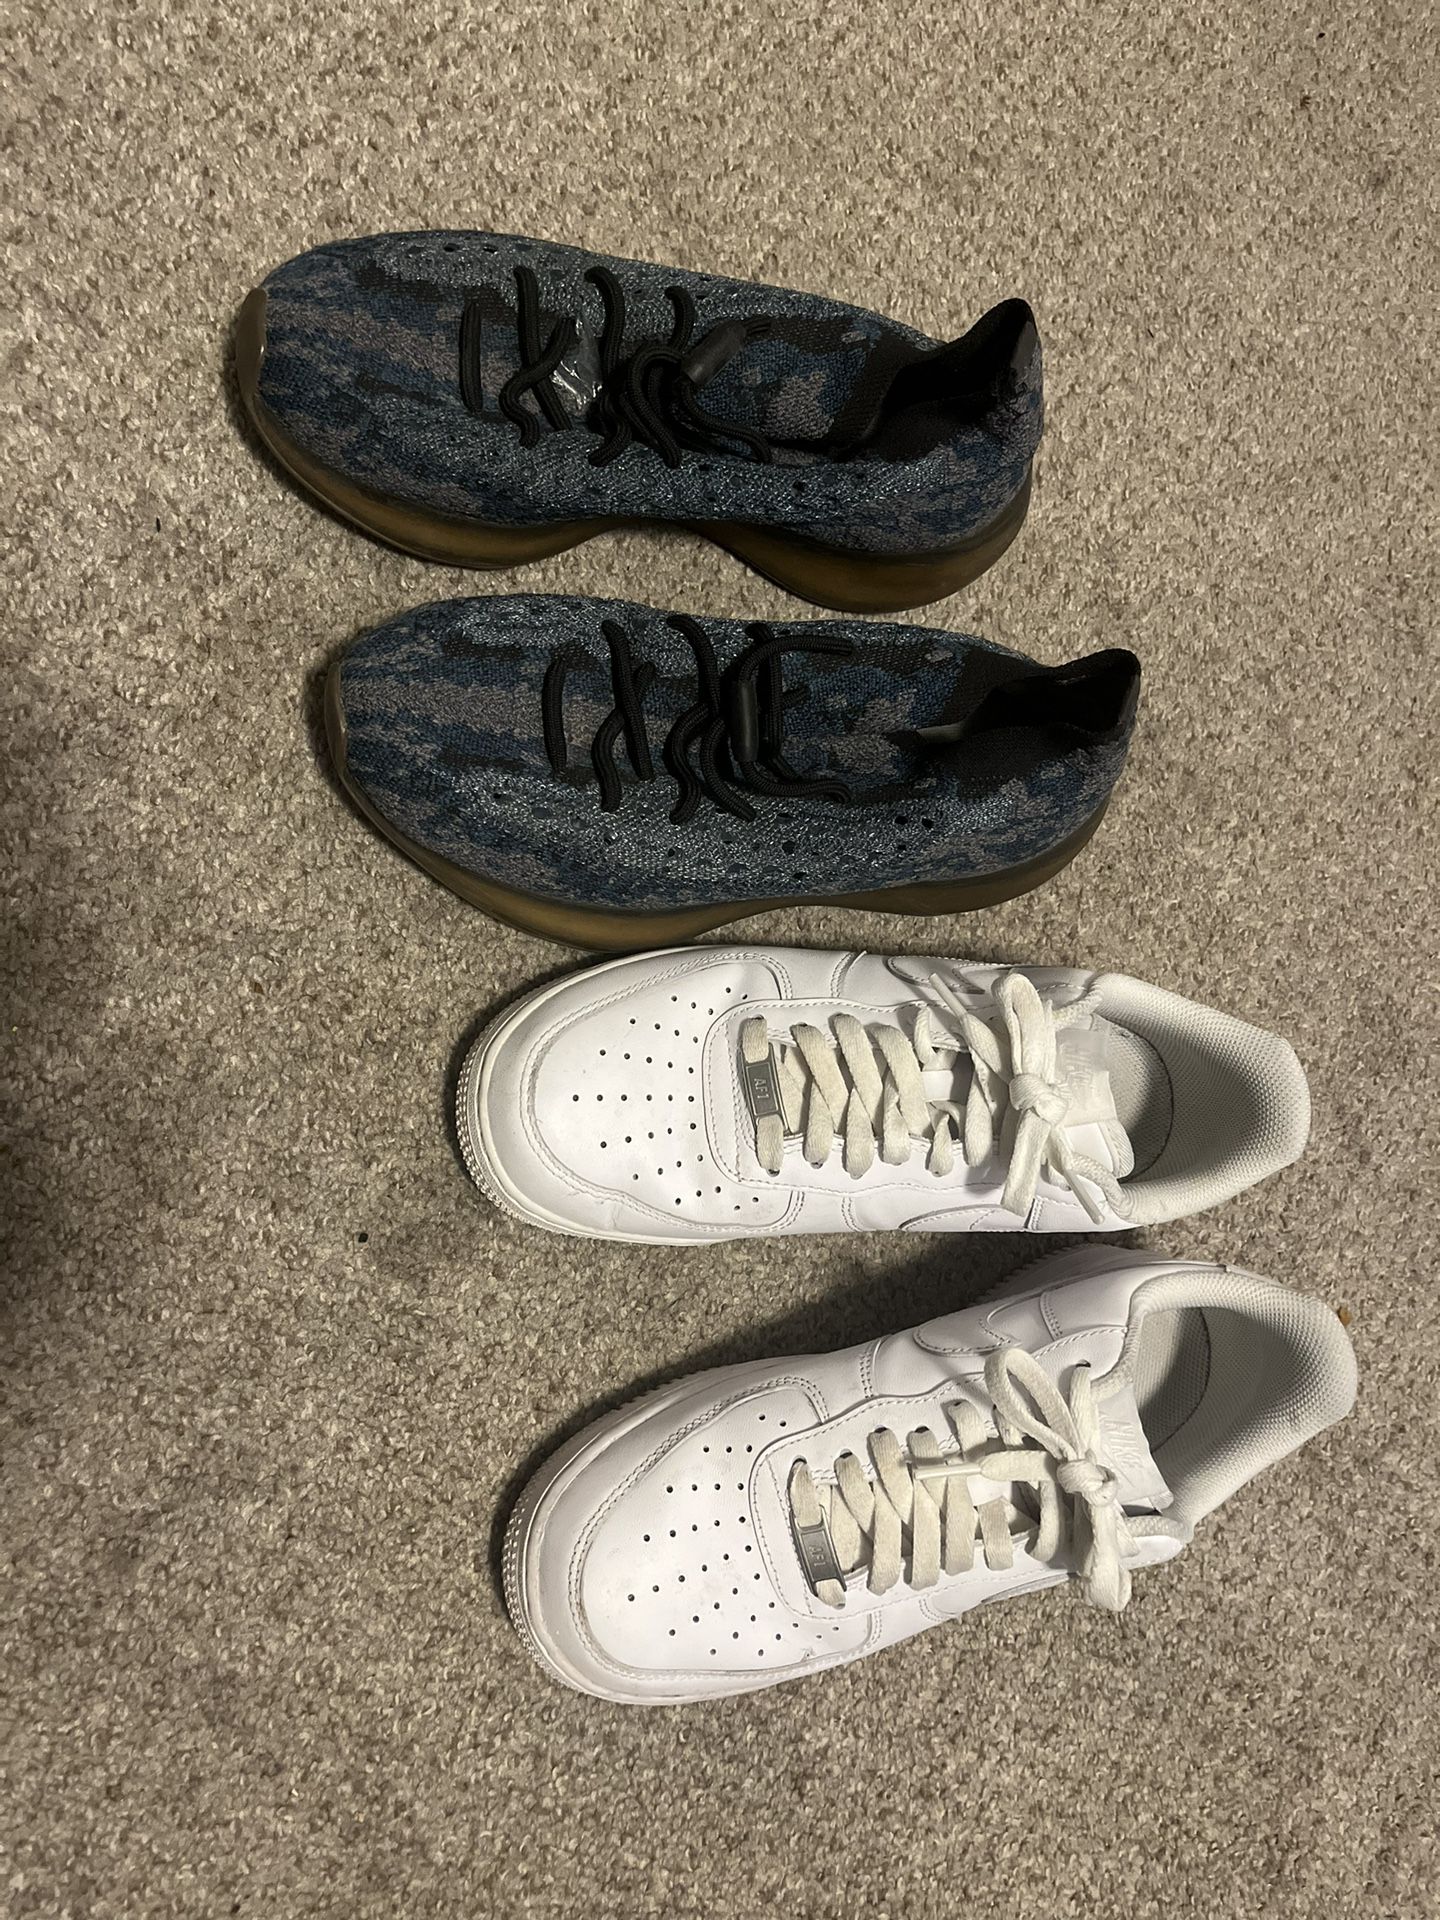 Yeezys & Air Force 1s for Sale in San Antonio, TX - OfferUp